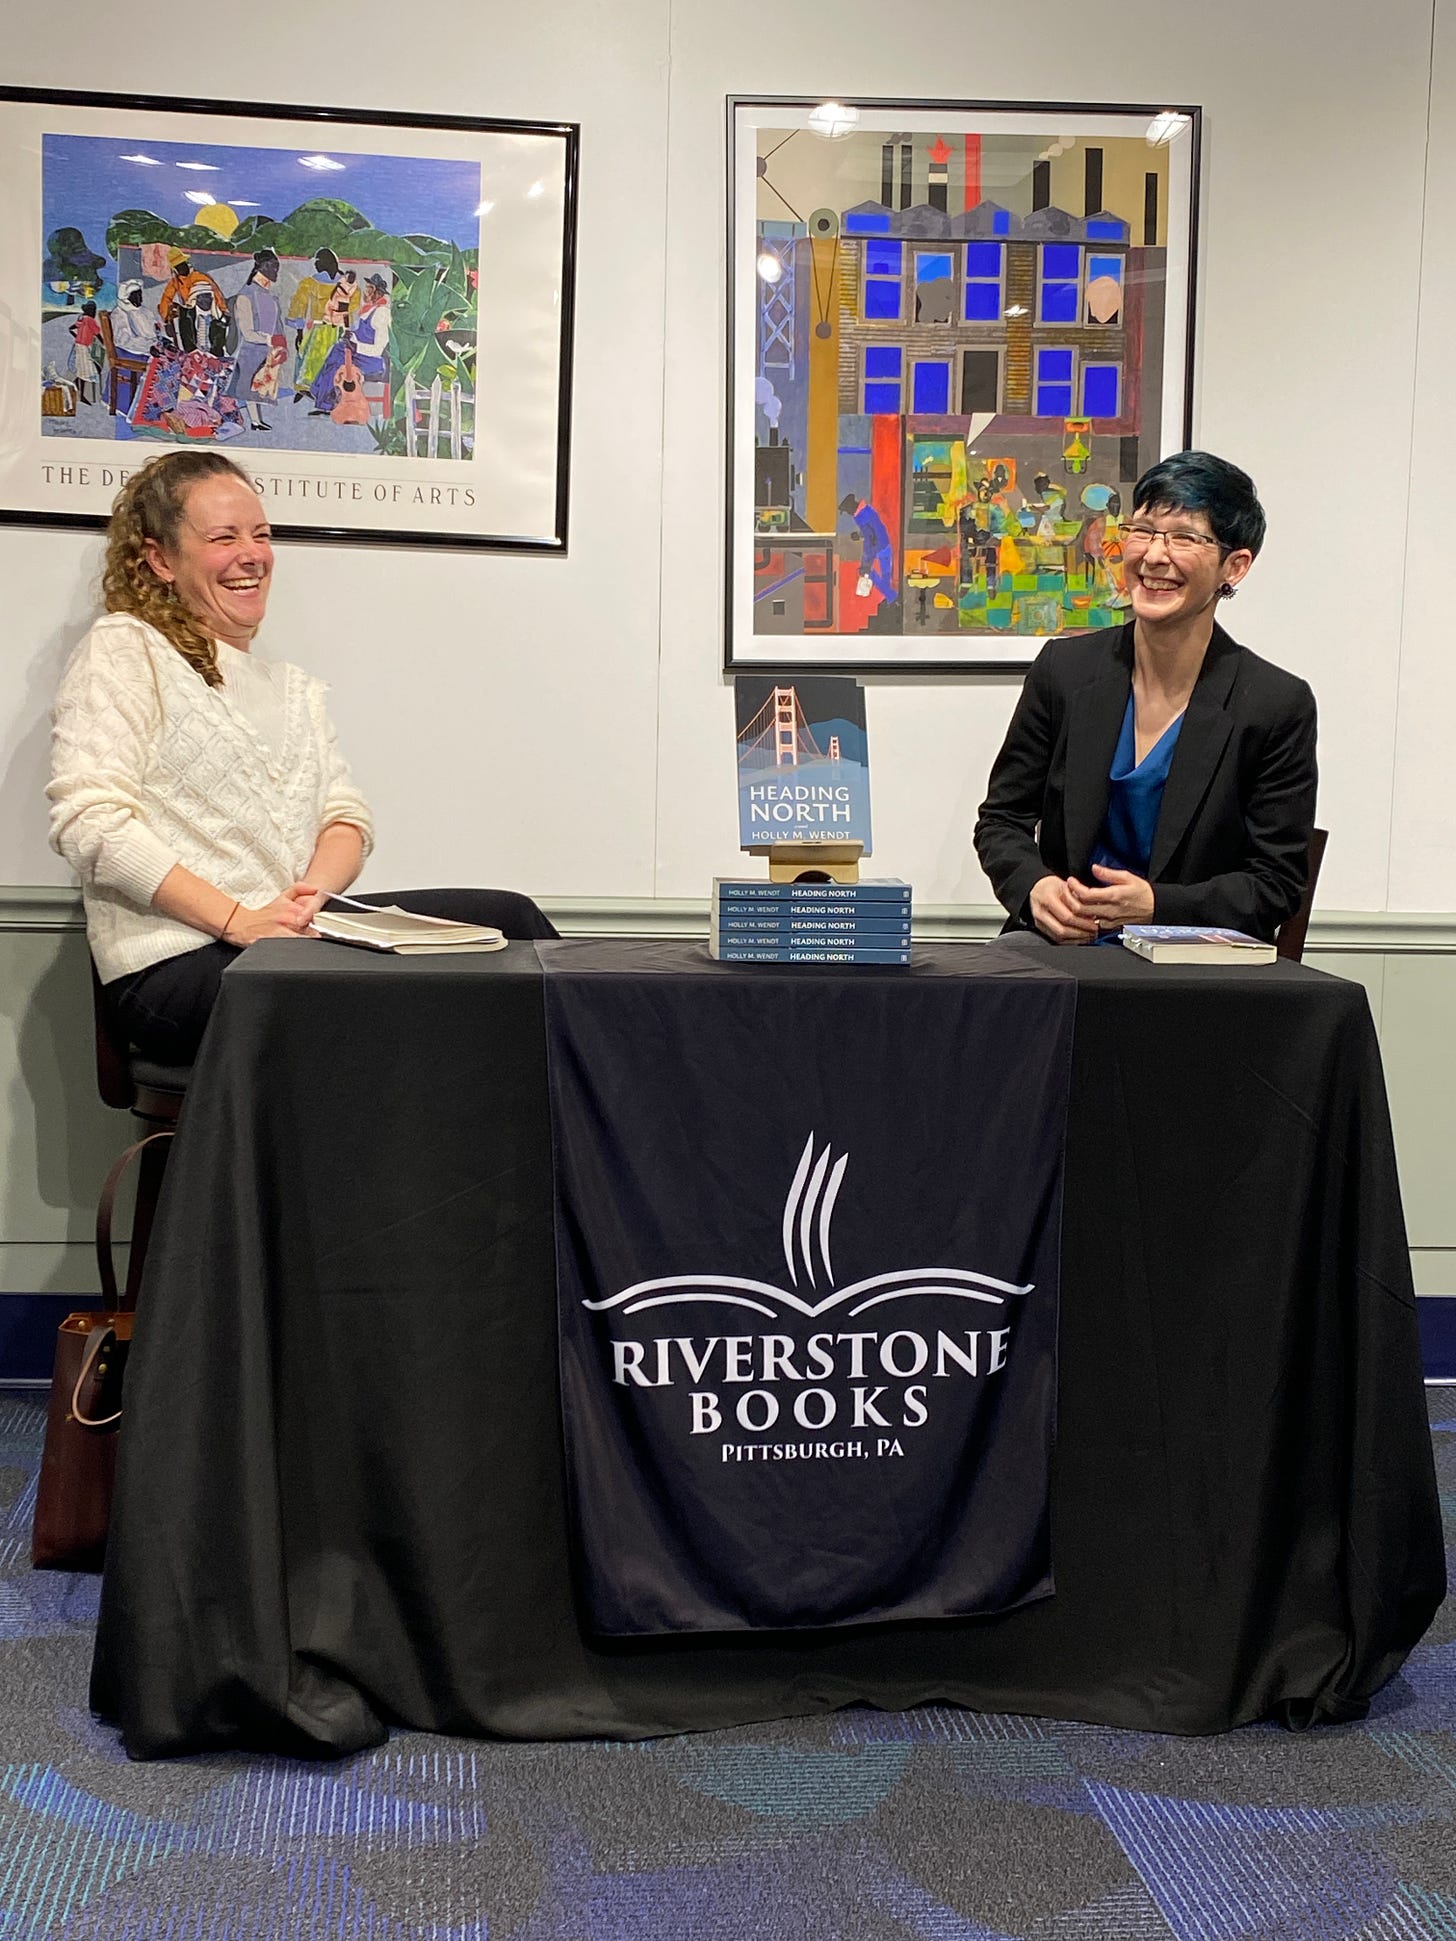 Clare Beams, left and Holly M. Wendt, right at Riverstone books, Pittsburgh, with a table between them and works of art behind them, giving an author talk and Q&A.